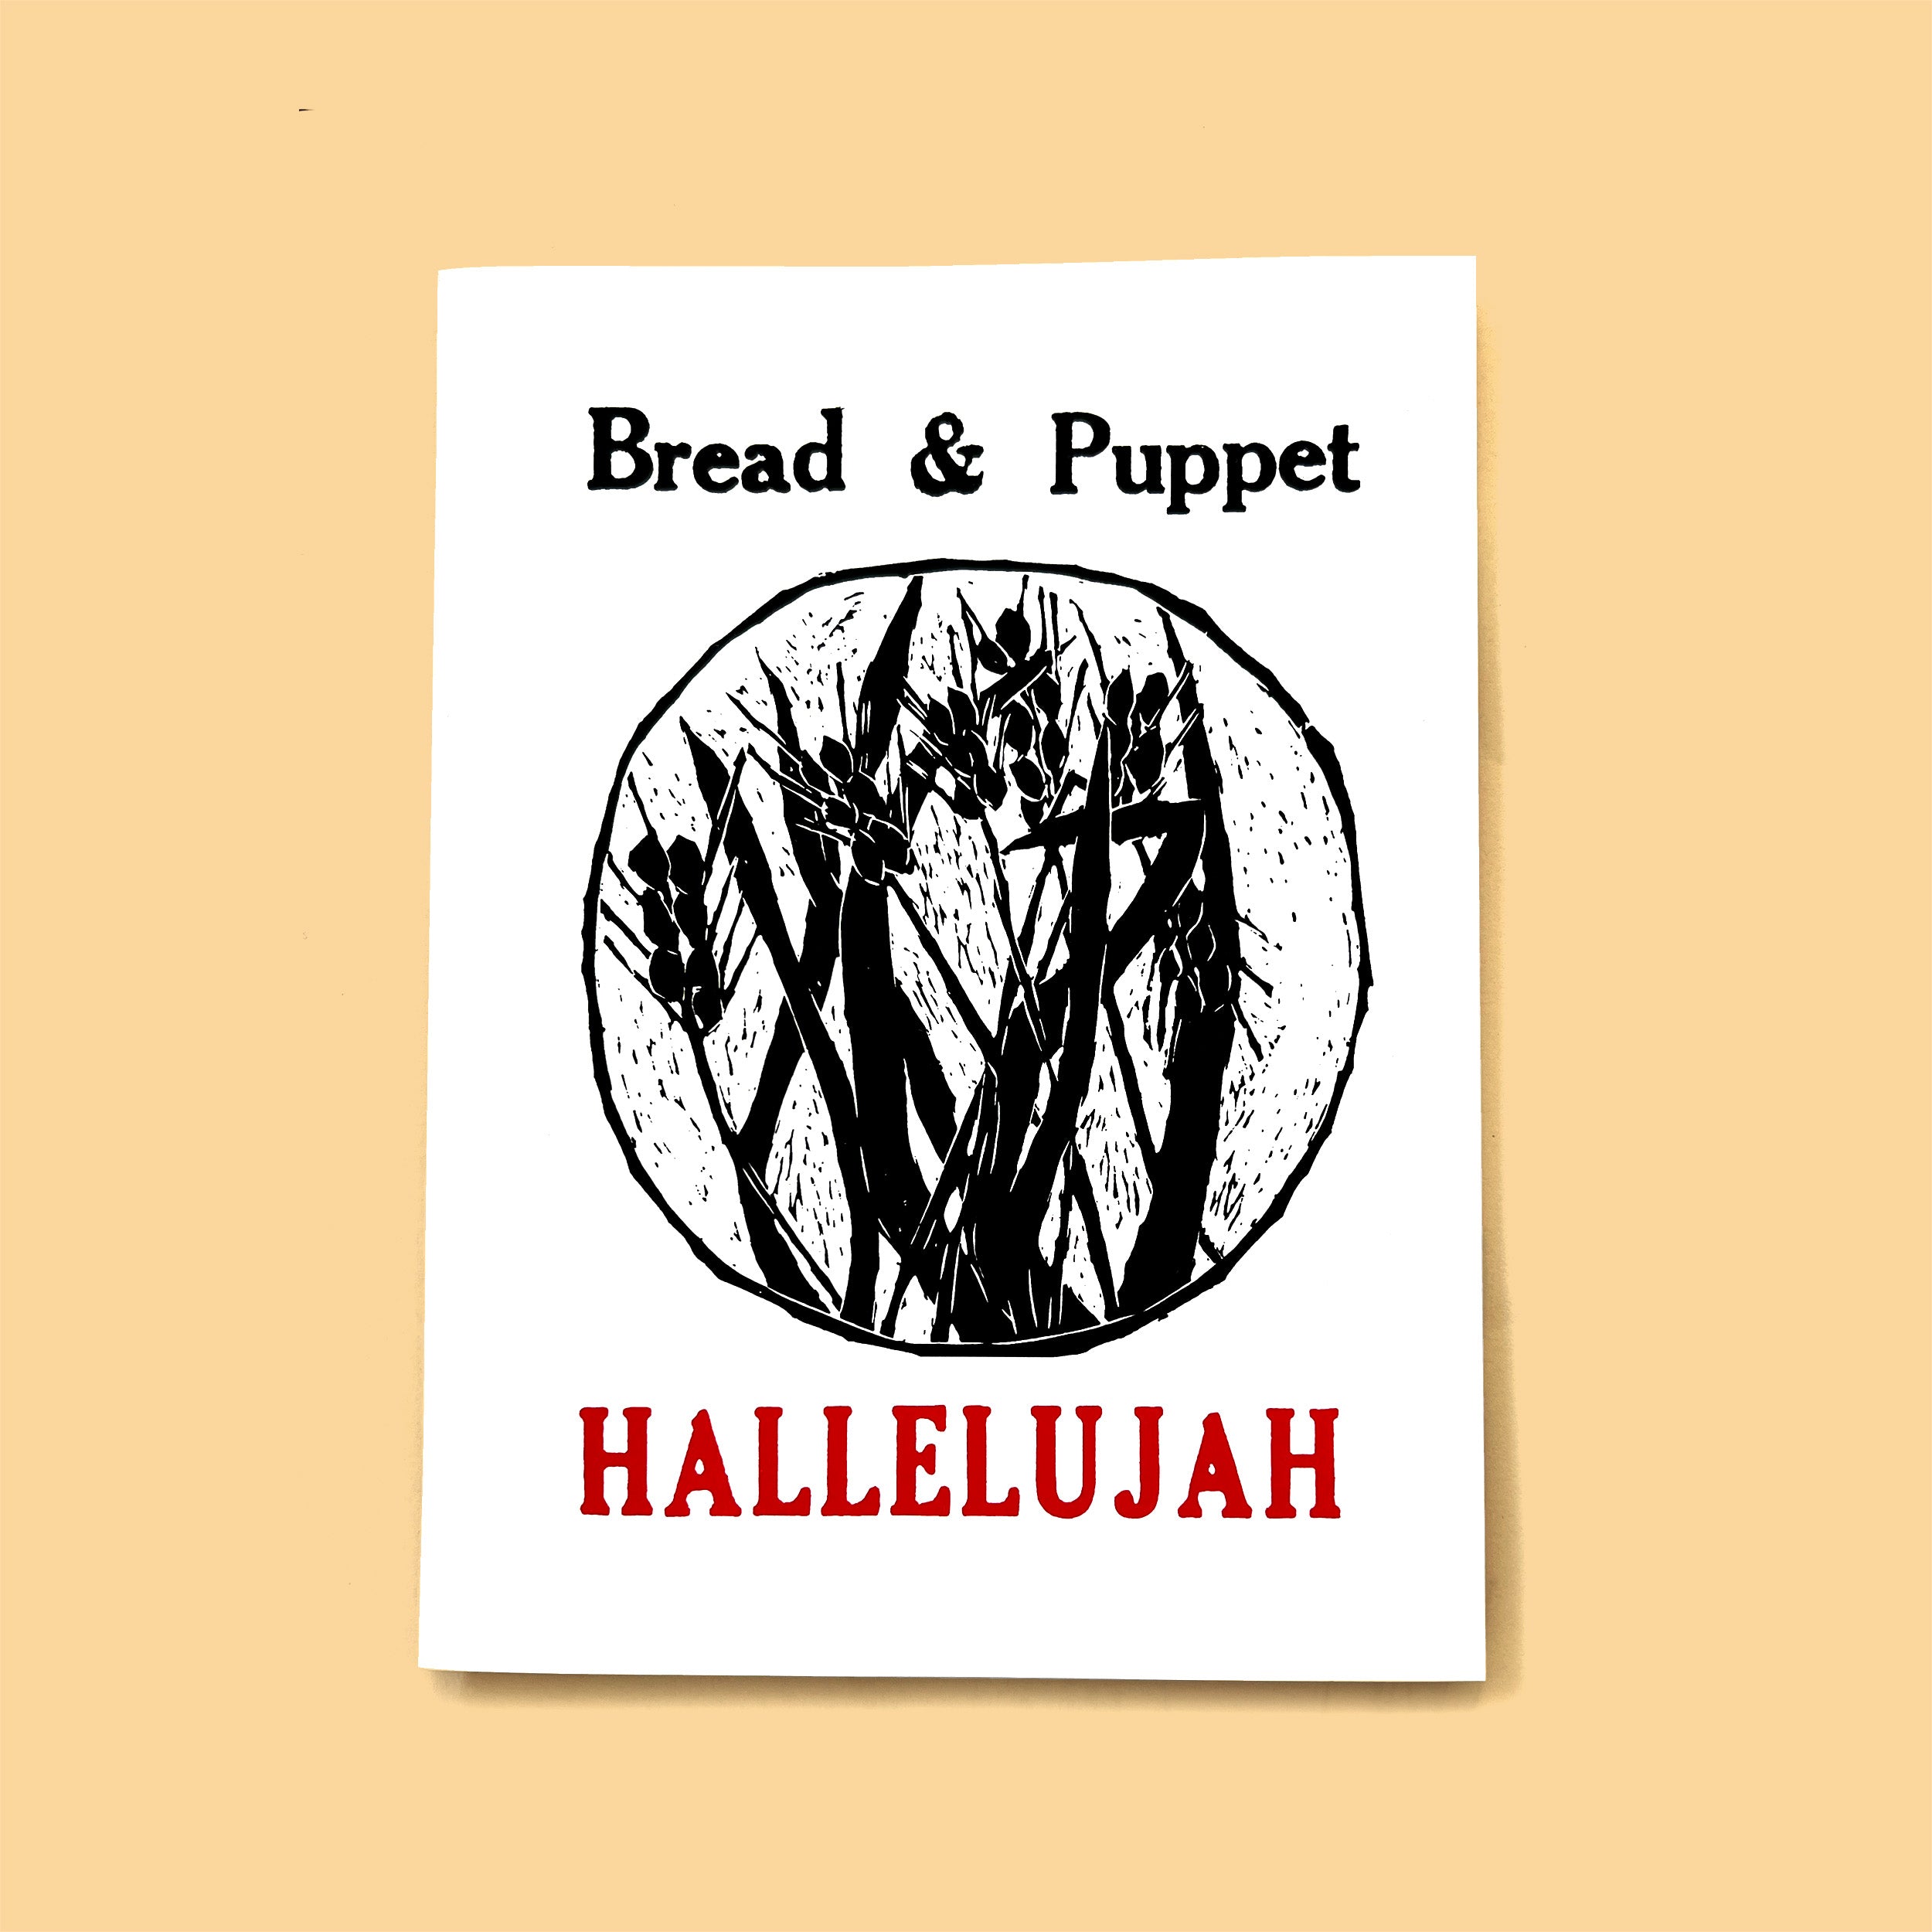 HALLELUJAH - BREAD AND PUPPET